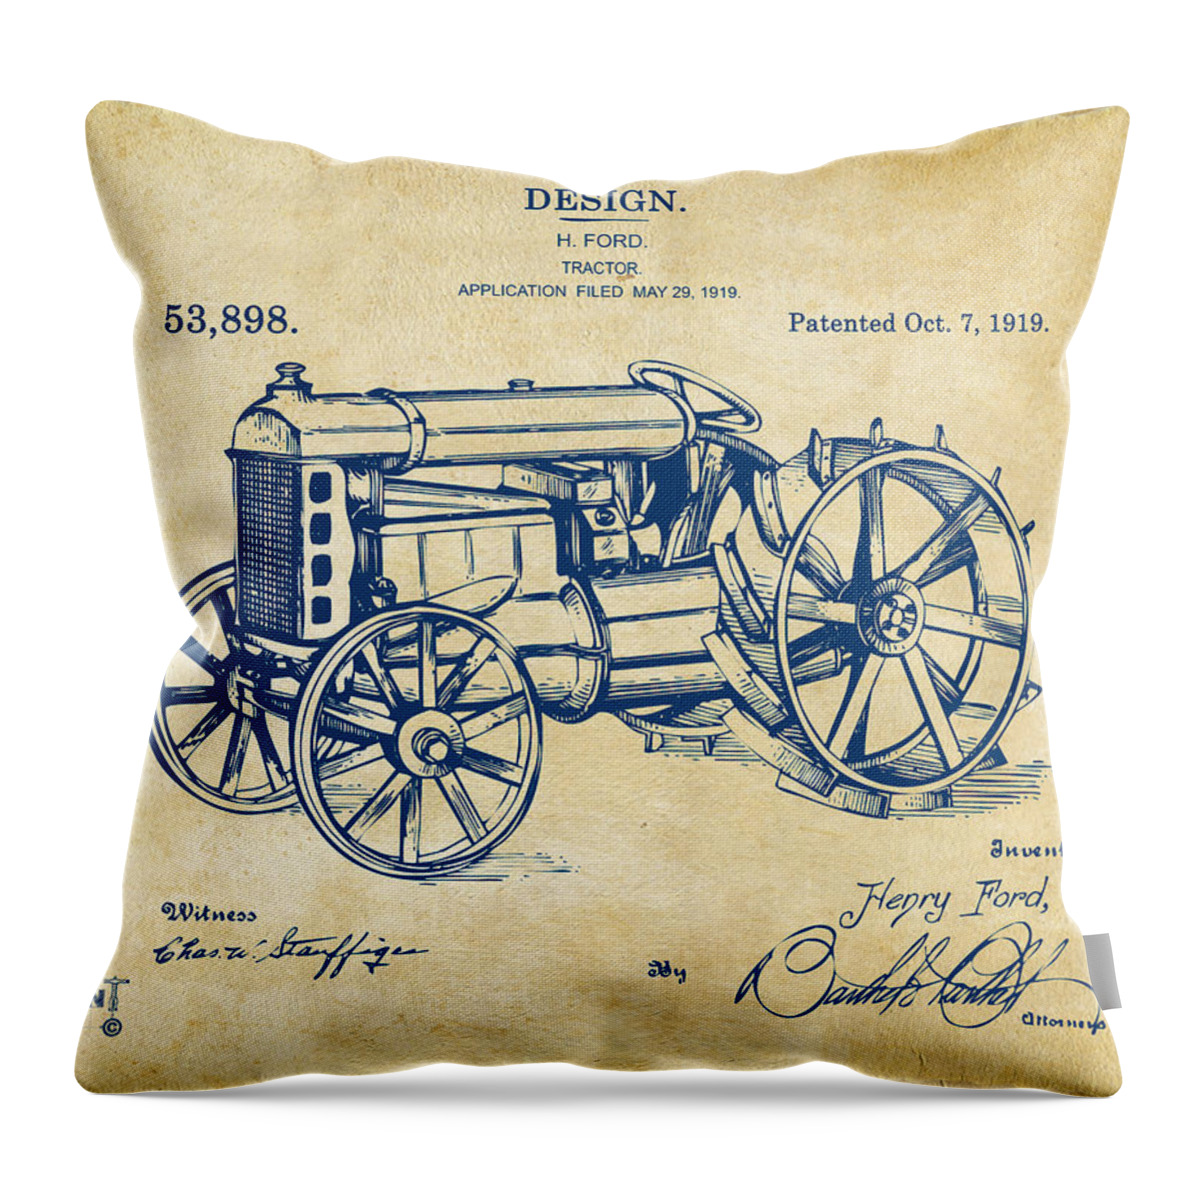 Henry Ford Throw Pillow featuring the digital art 1919 Henry Ford Tractor Patent Vintage by Nikki Marie Smith